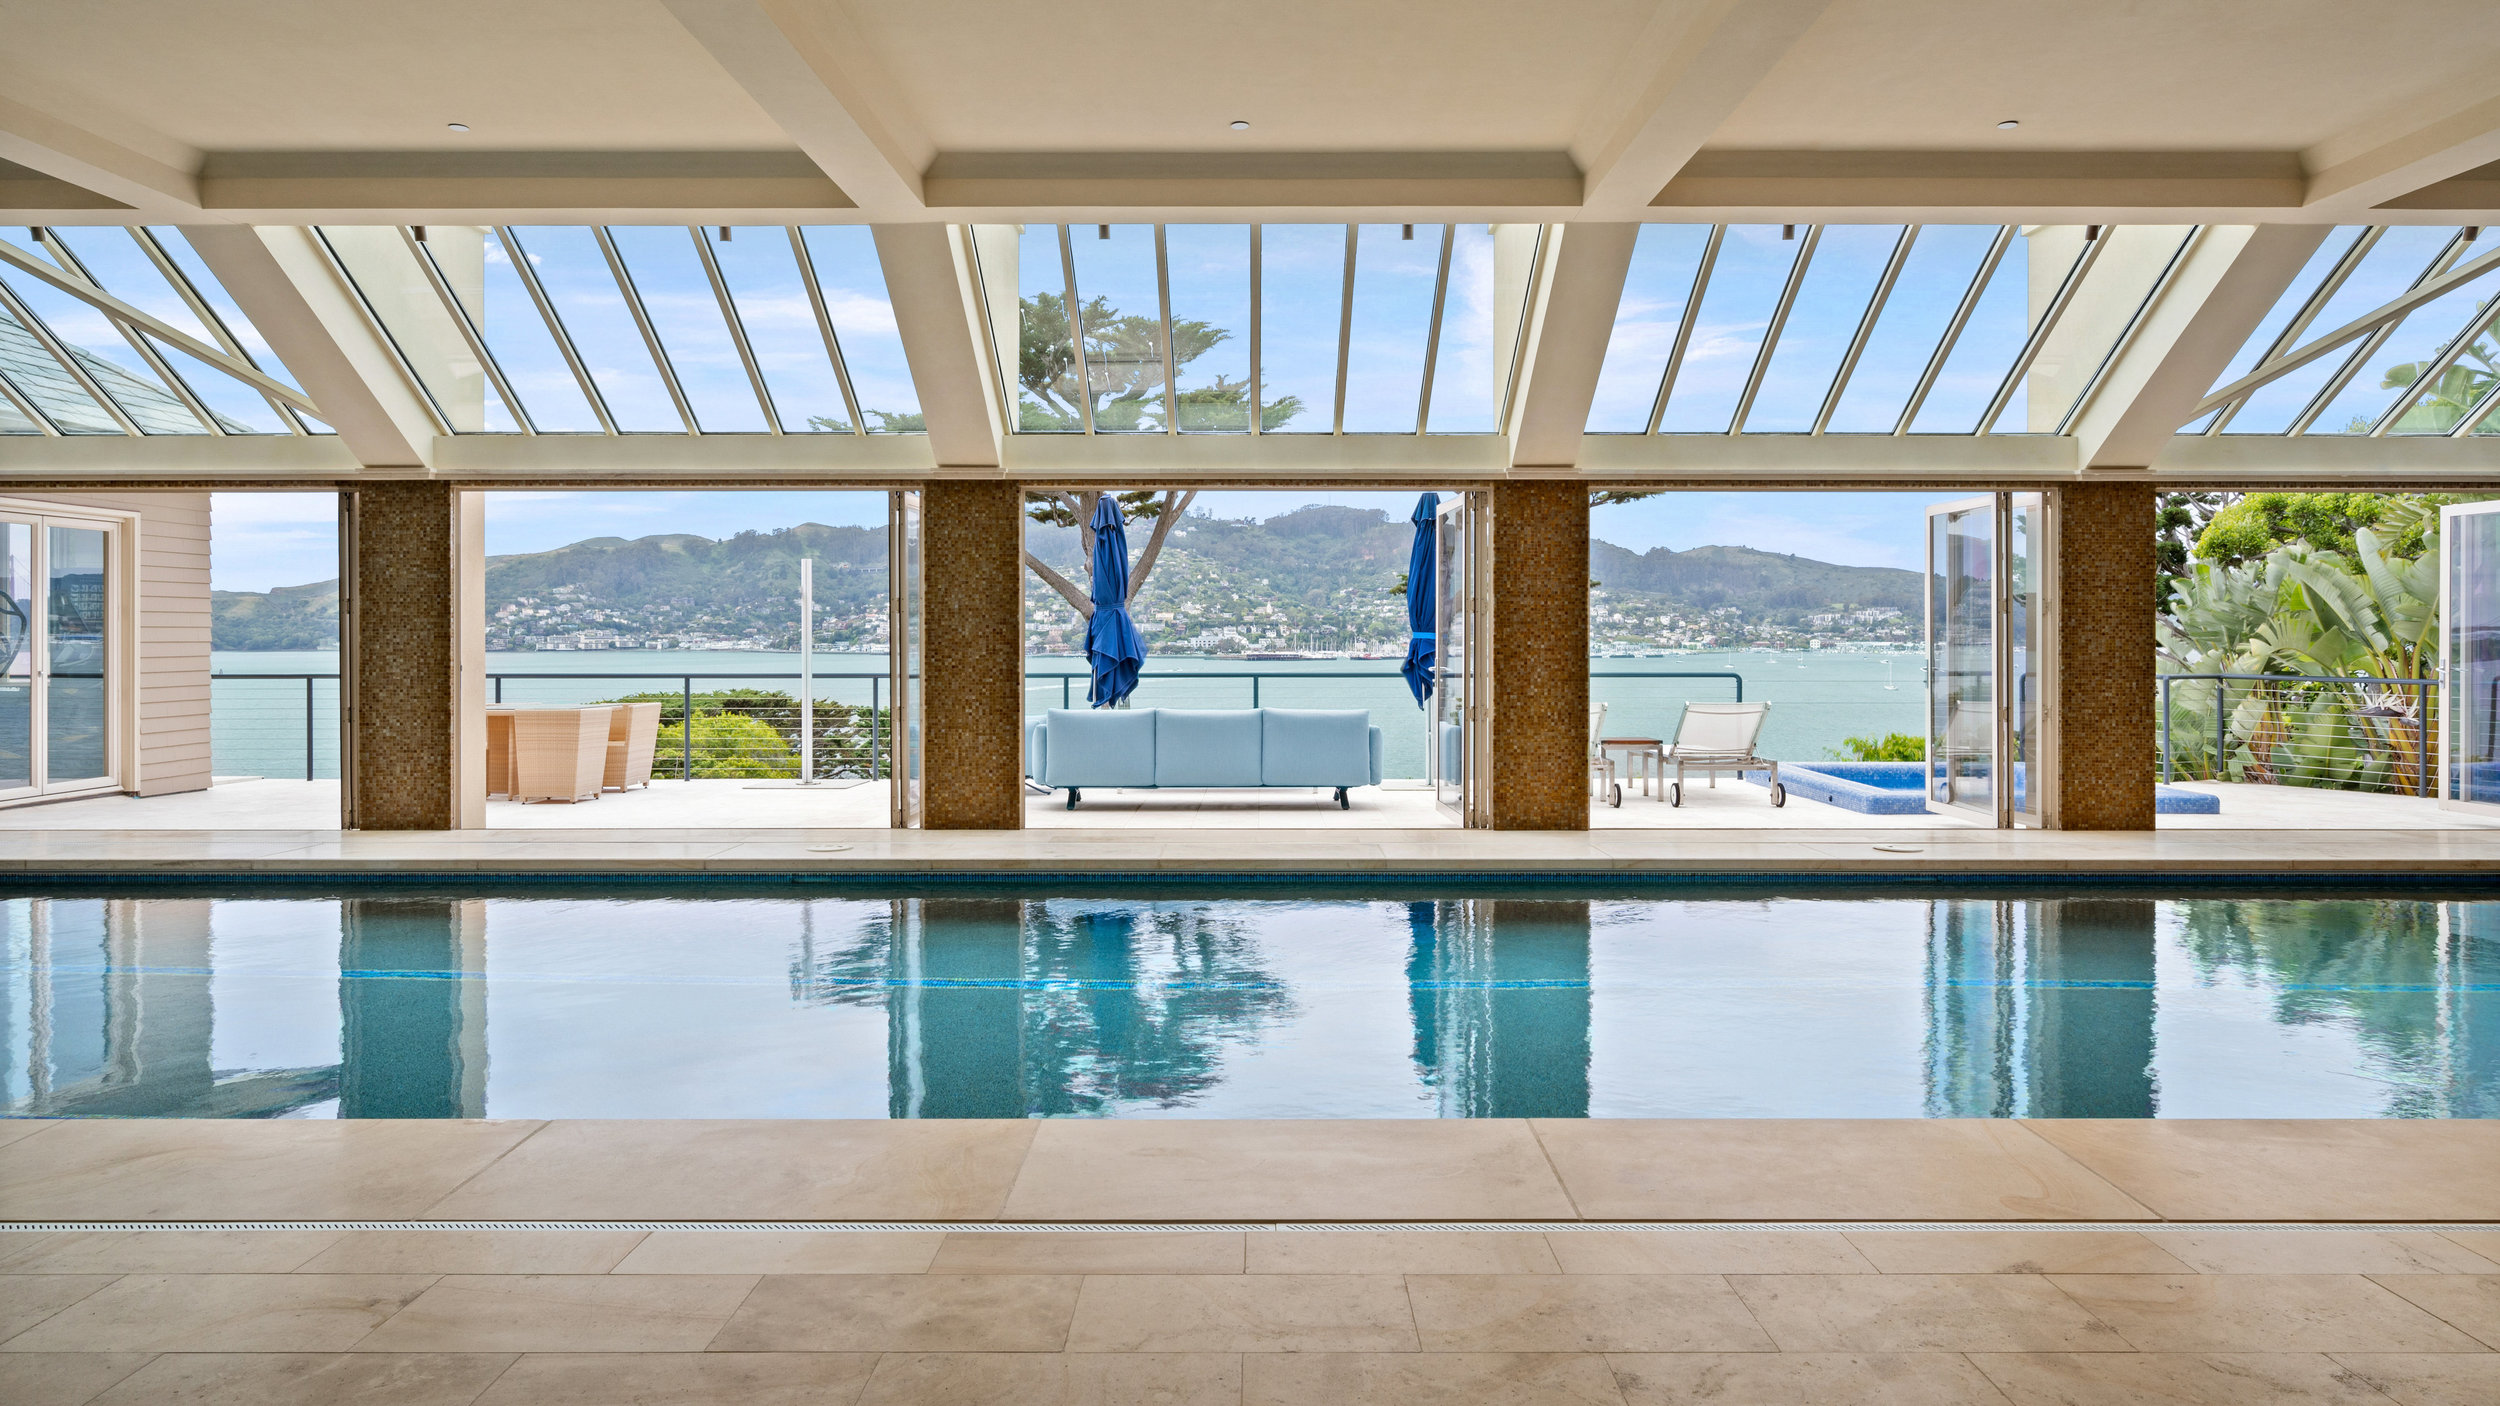 View of 333 Belvedere, showing the indoor pool and San Francisco Bay beyond